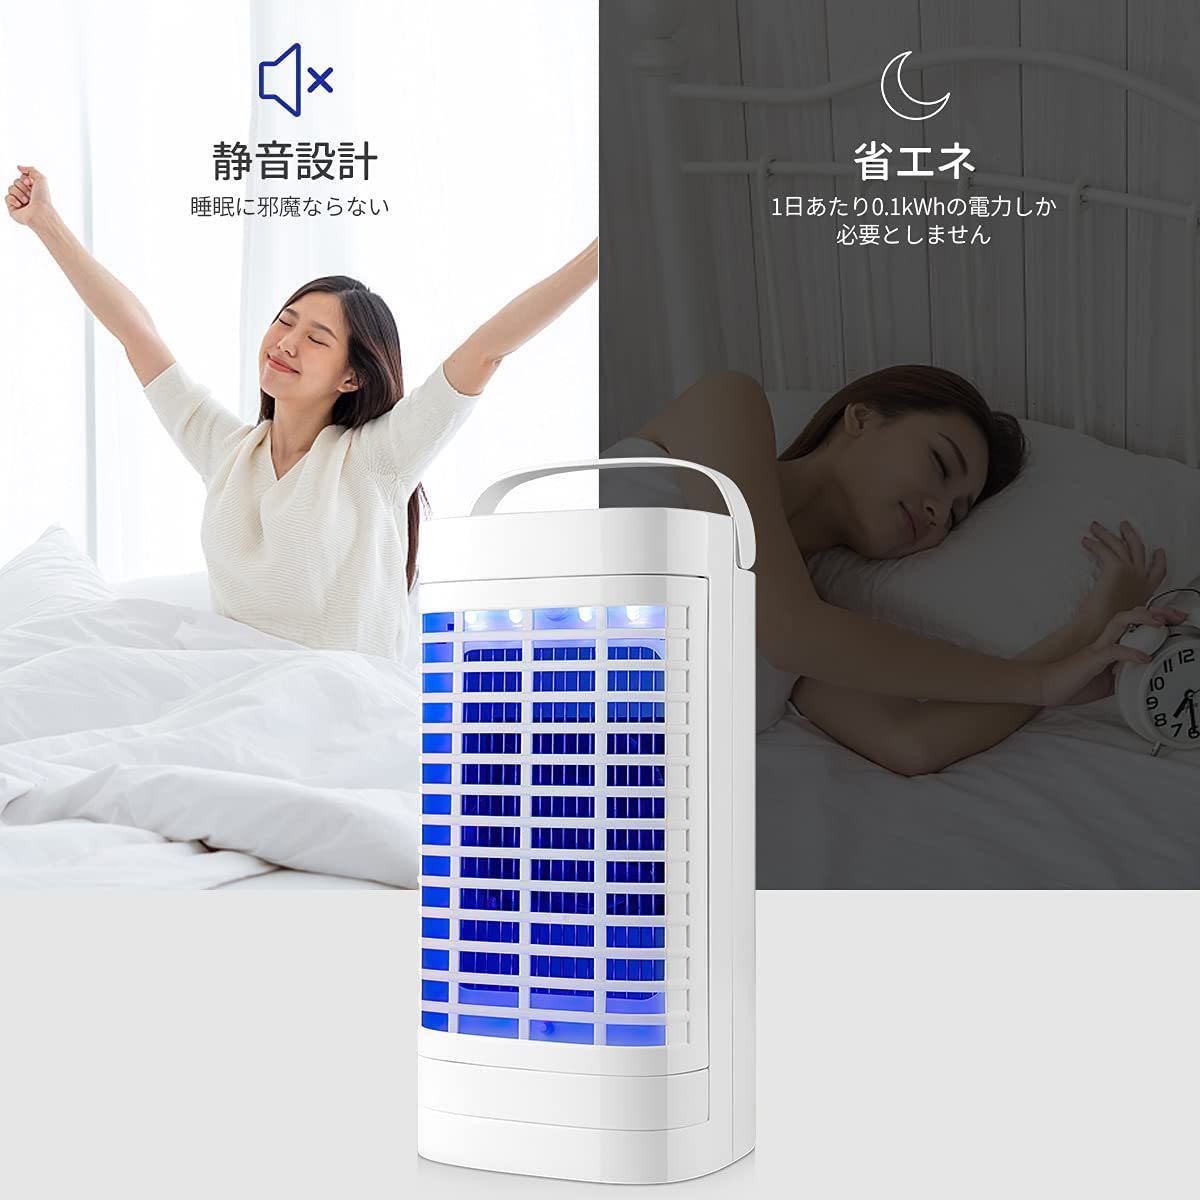  powerful . insecticide electric bug killer electric mosquito repellent vessel energy conservation medicina un- for less . quiet sound uv light source .. type . insect vessel smell . smoke none 